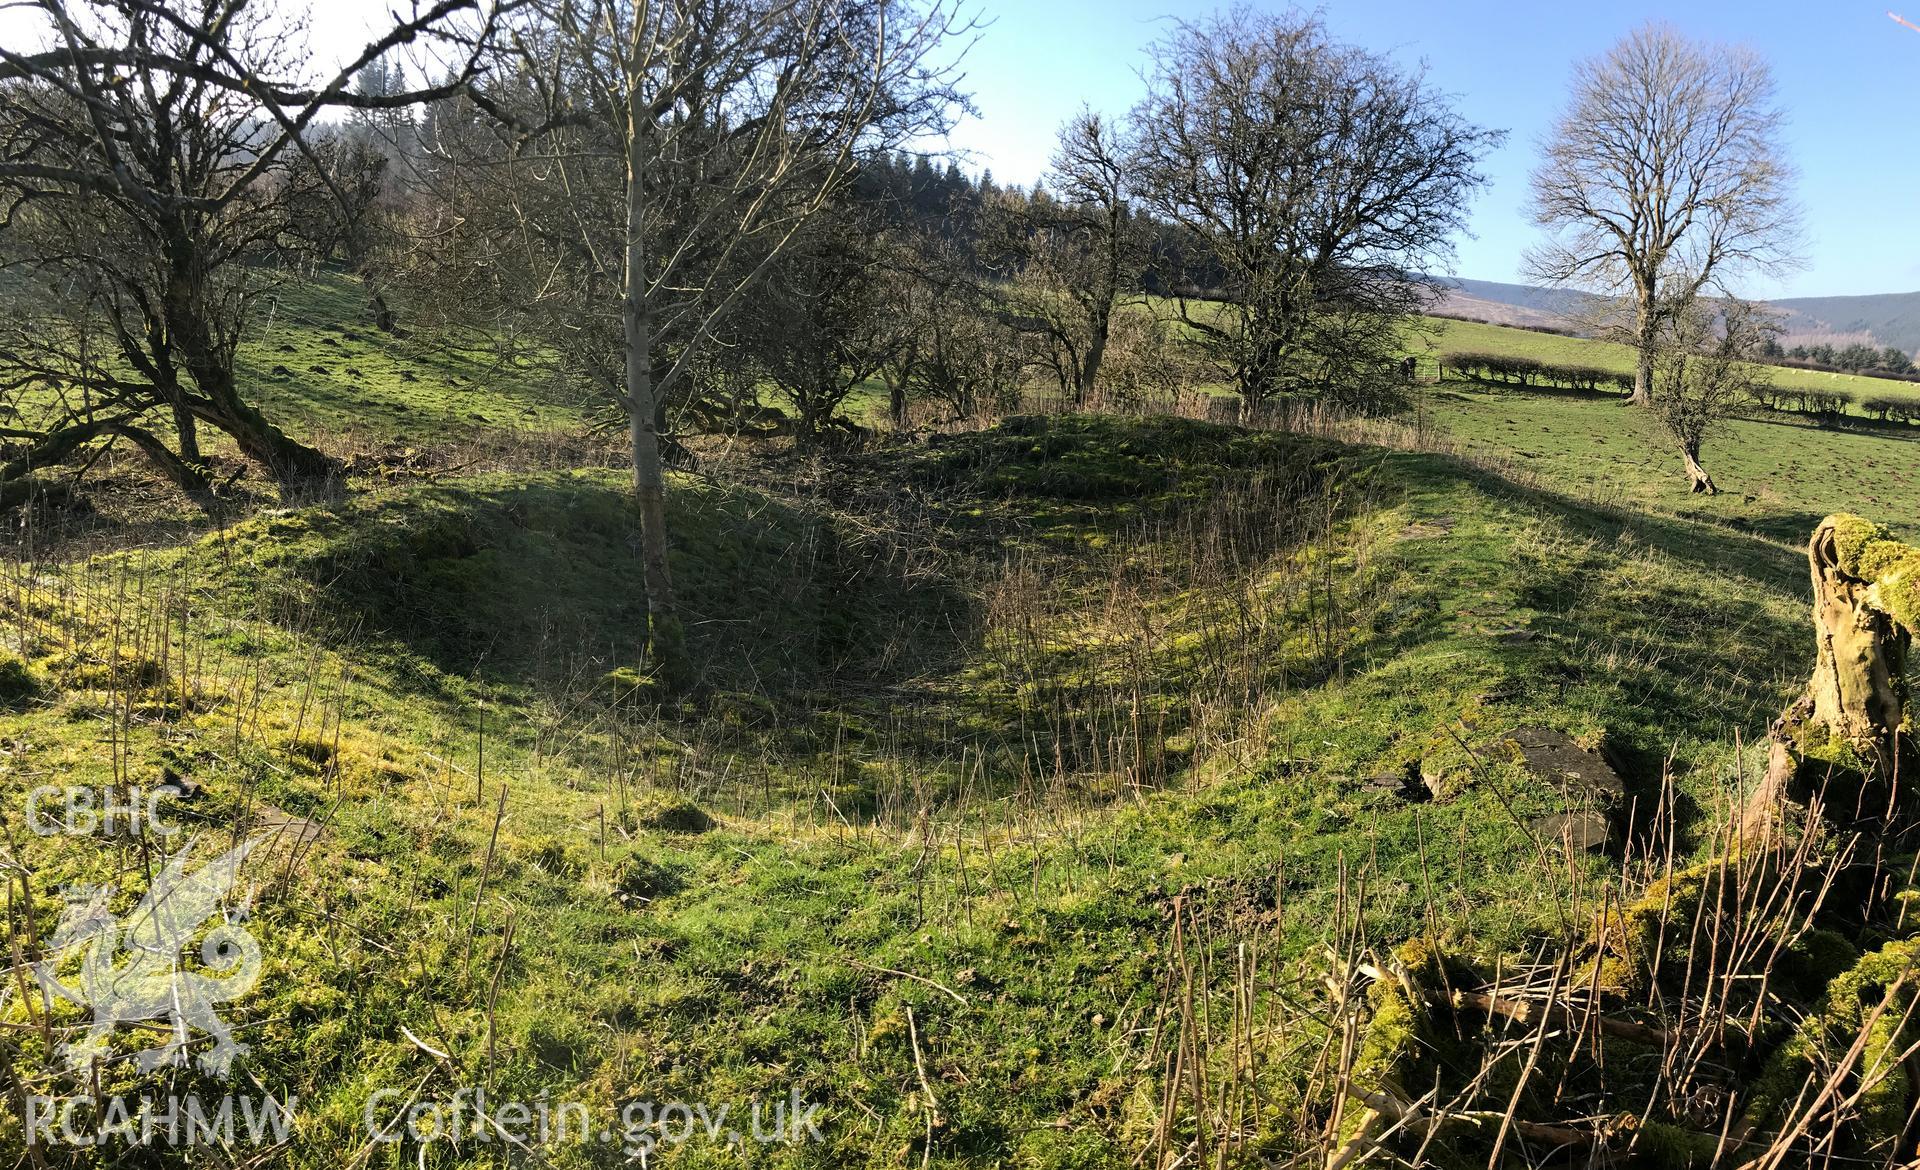 Digital colour photograph showing the site of Ednol Church, west of Presteigne, taken by Paul Davis on 7th February 2020.